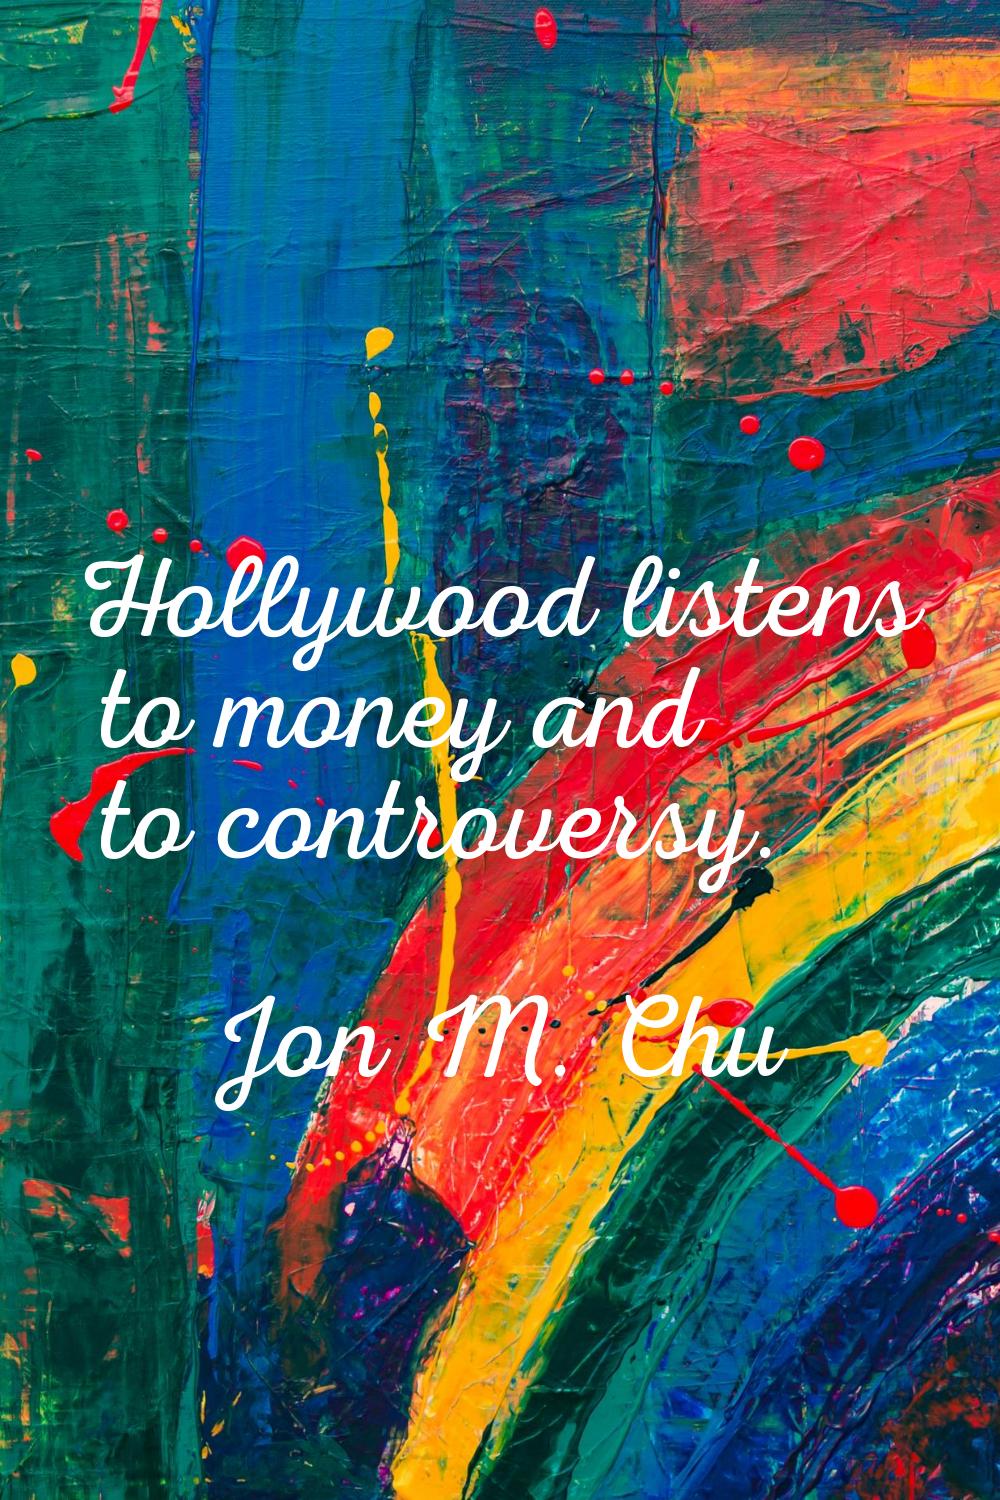 Hollywood listens to money and to controversy.